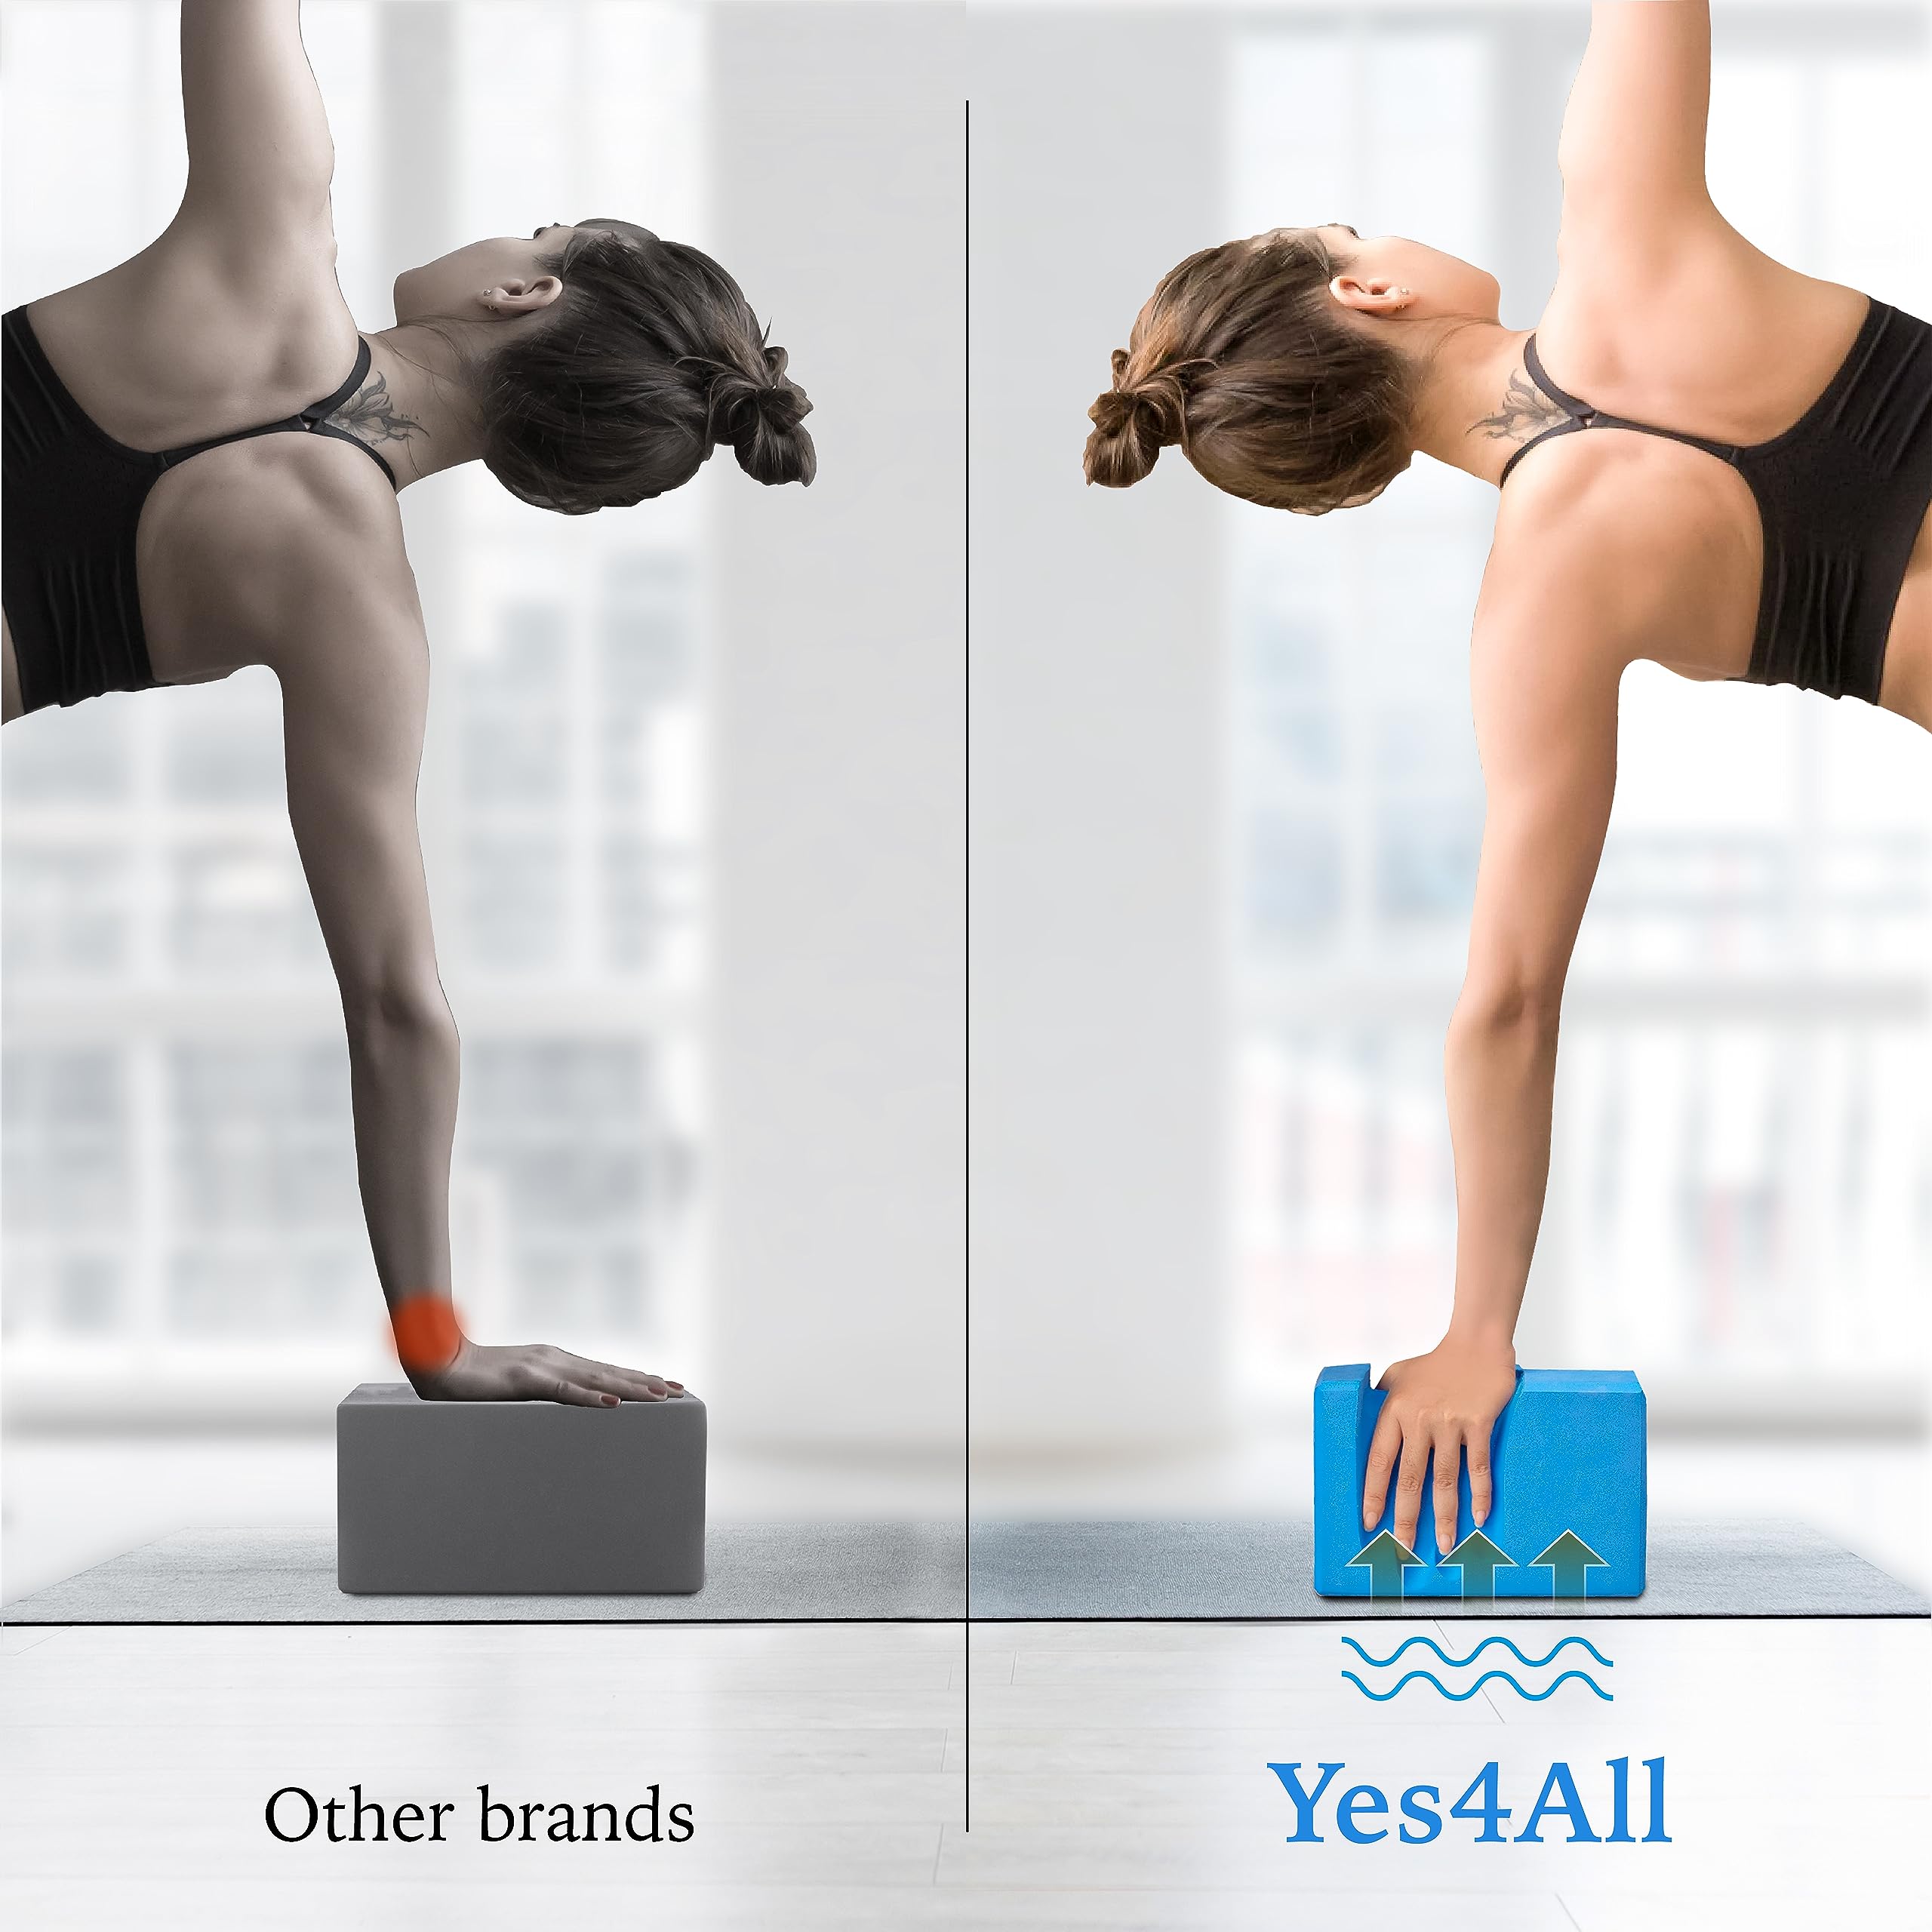 Yes4All Yoga Blocks 2 Pack Wrist Support, Comfort, and Grip Strength, Support for Balance Fitness and Exercise, EVA Foam Blocks Pilates Yoga Brick Yoga Accessories